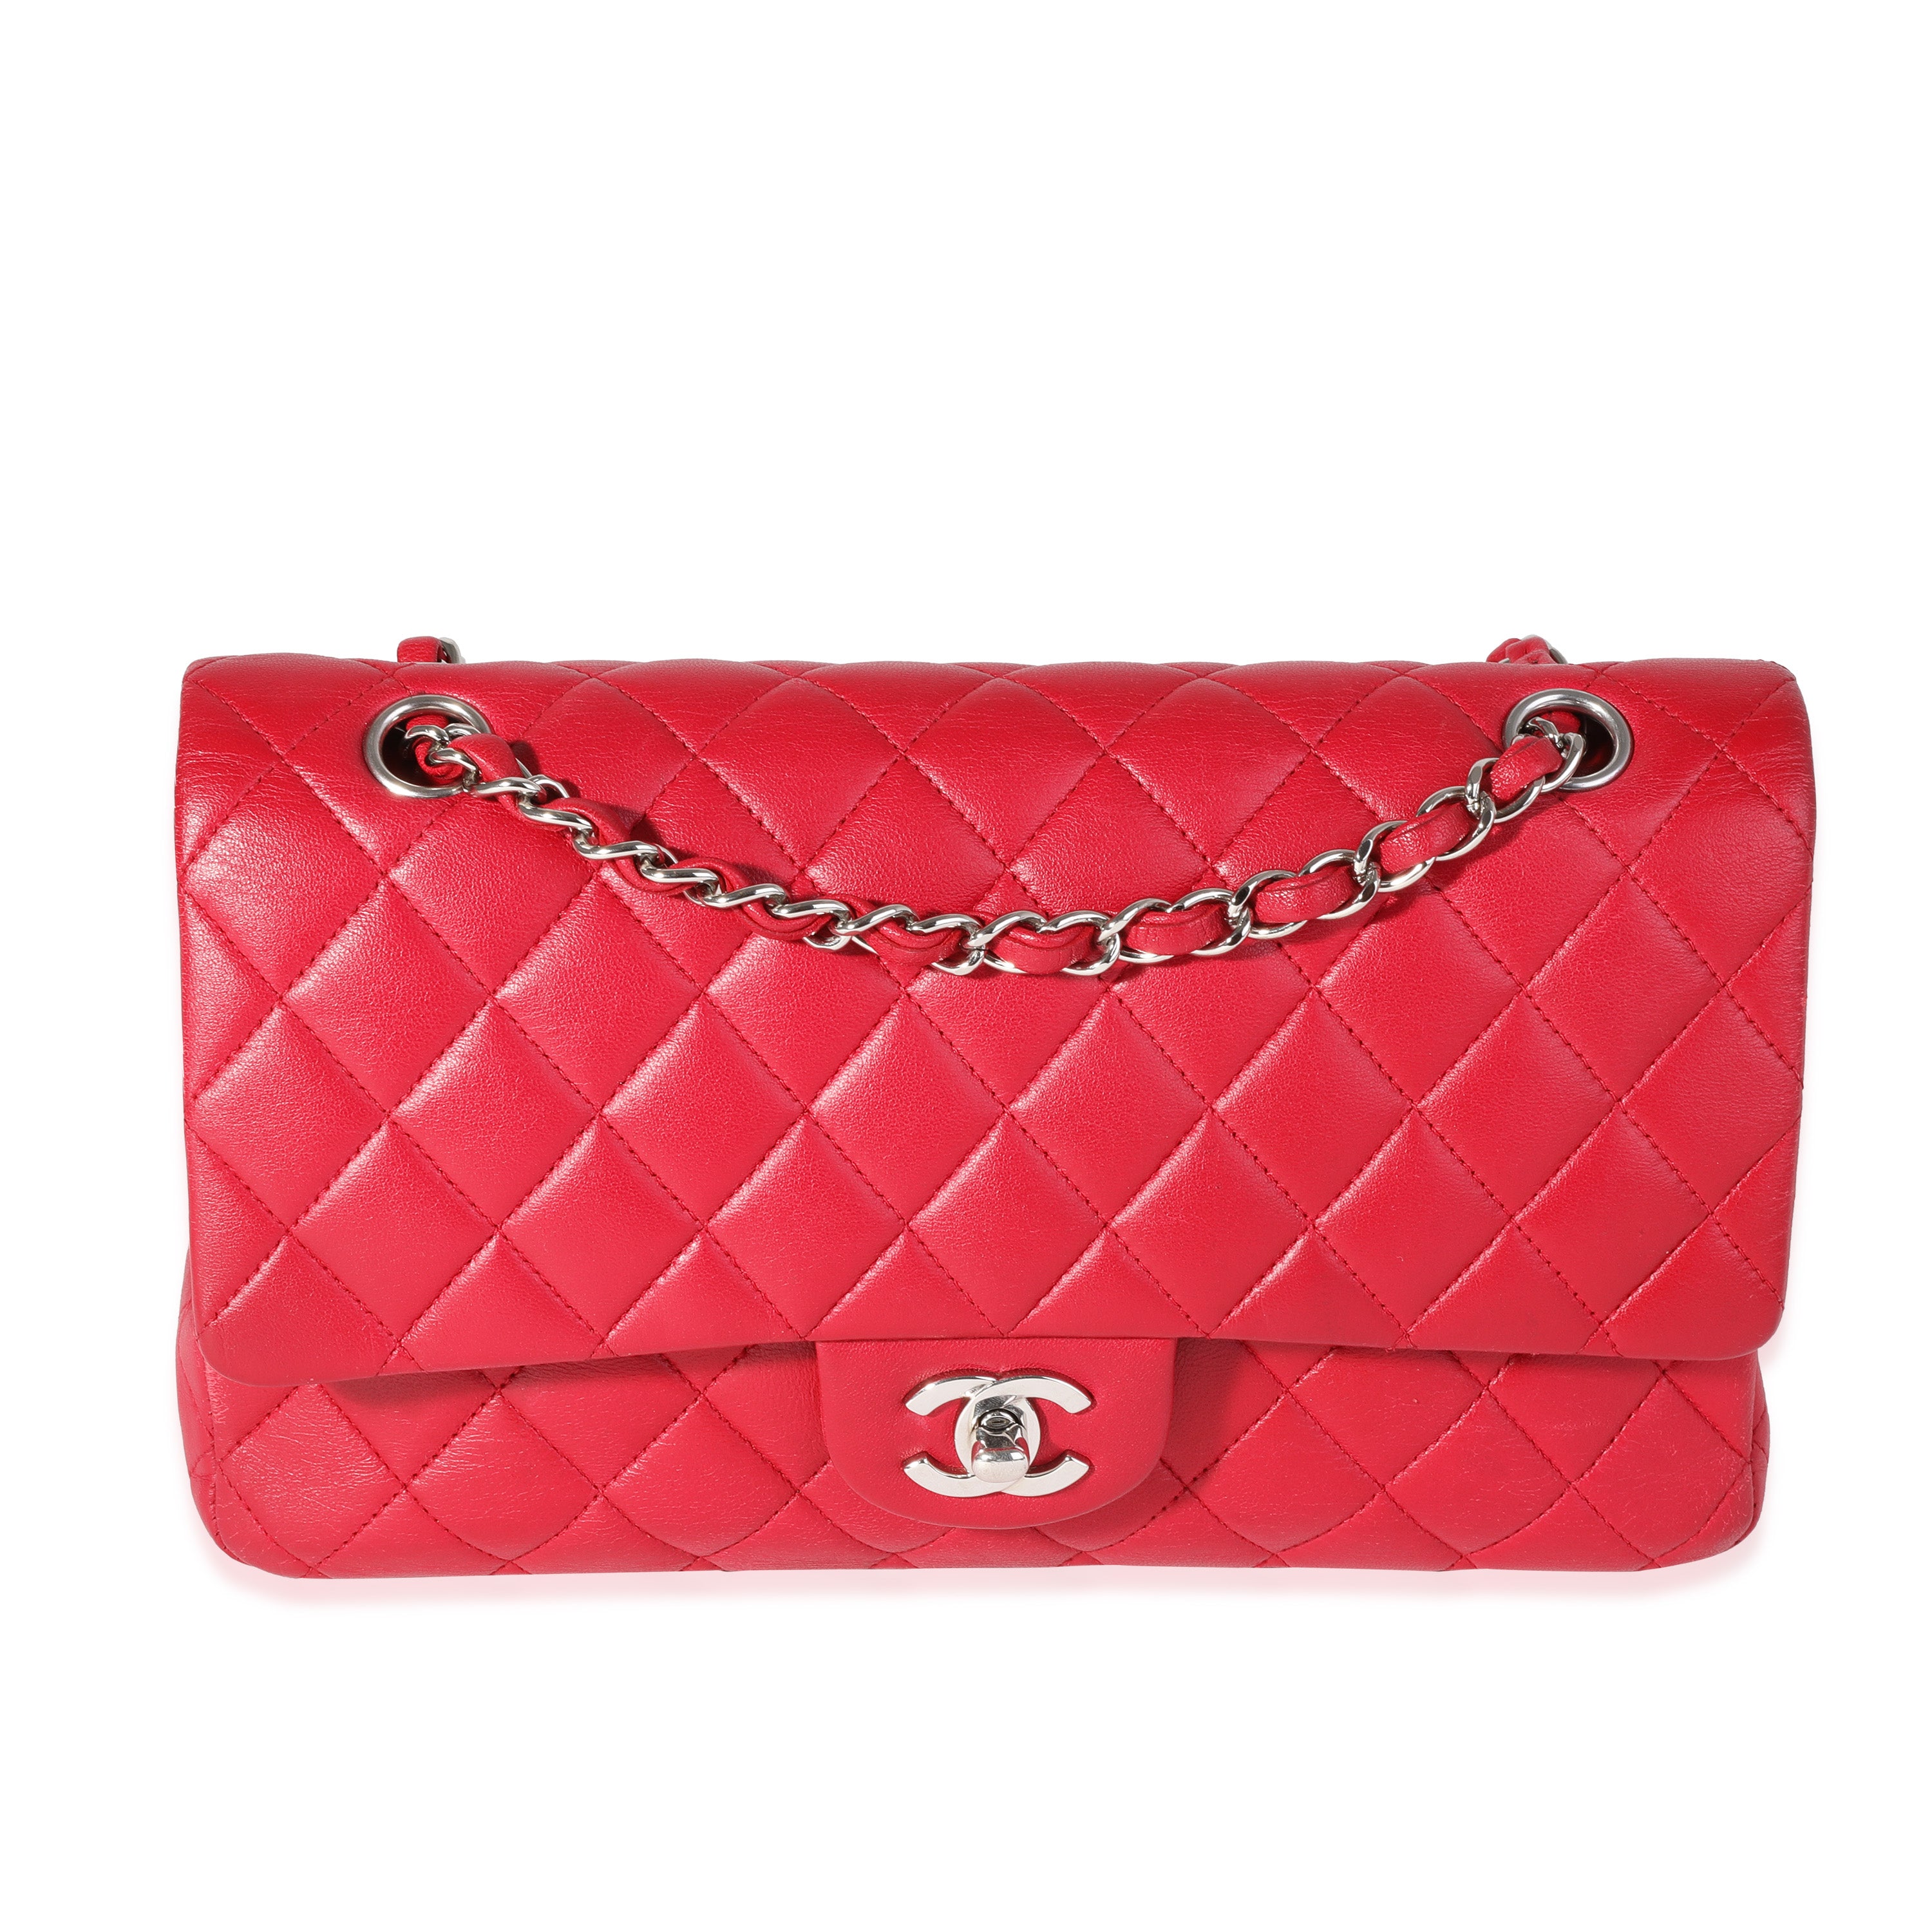 Chanel Red Quilted Lambskin Leather Medium Classic Double Flap Bag